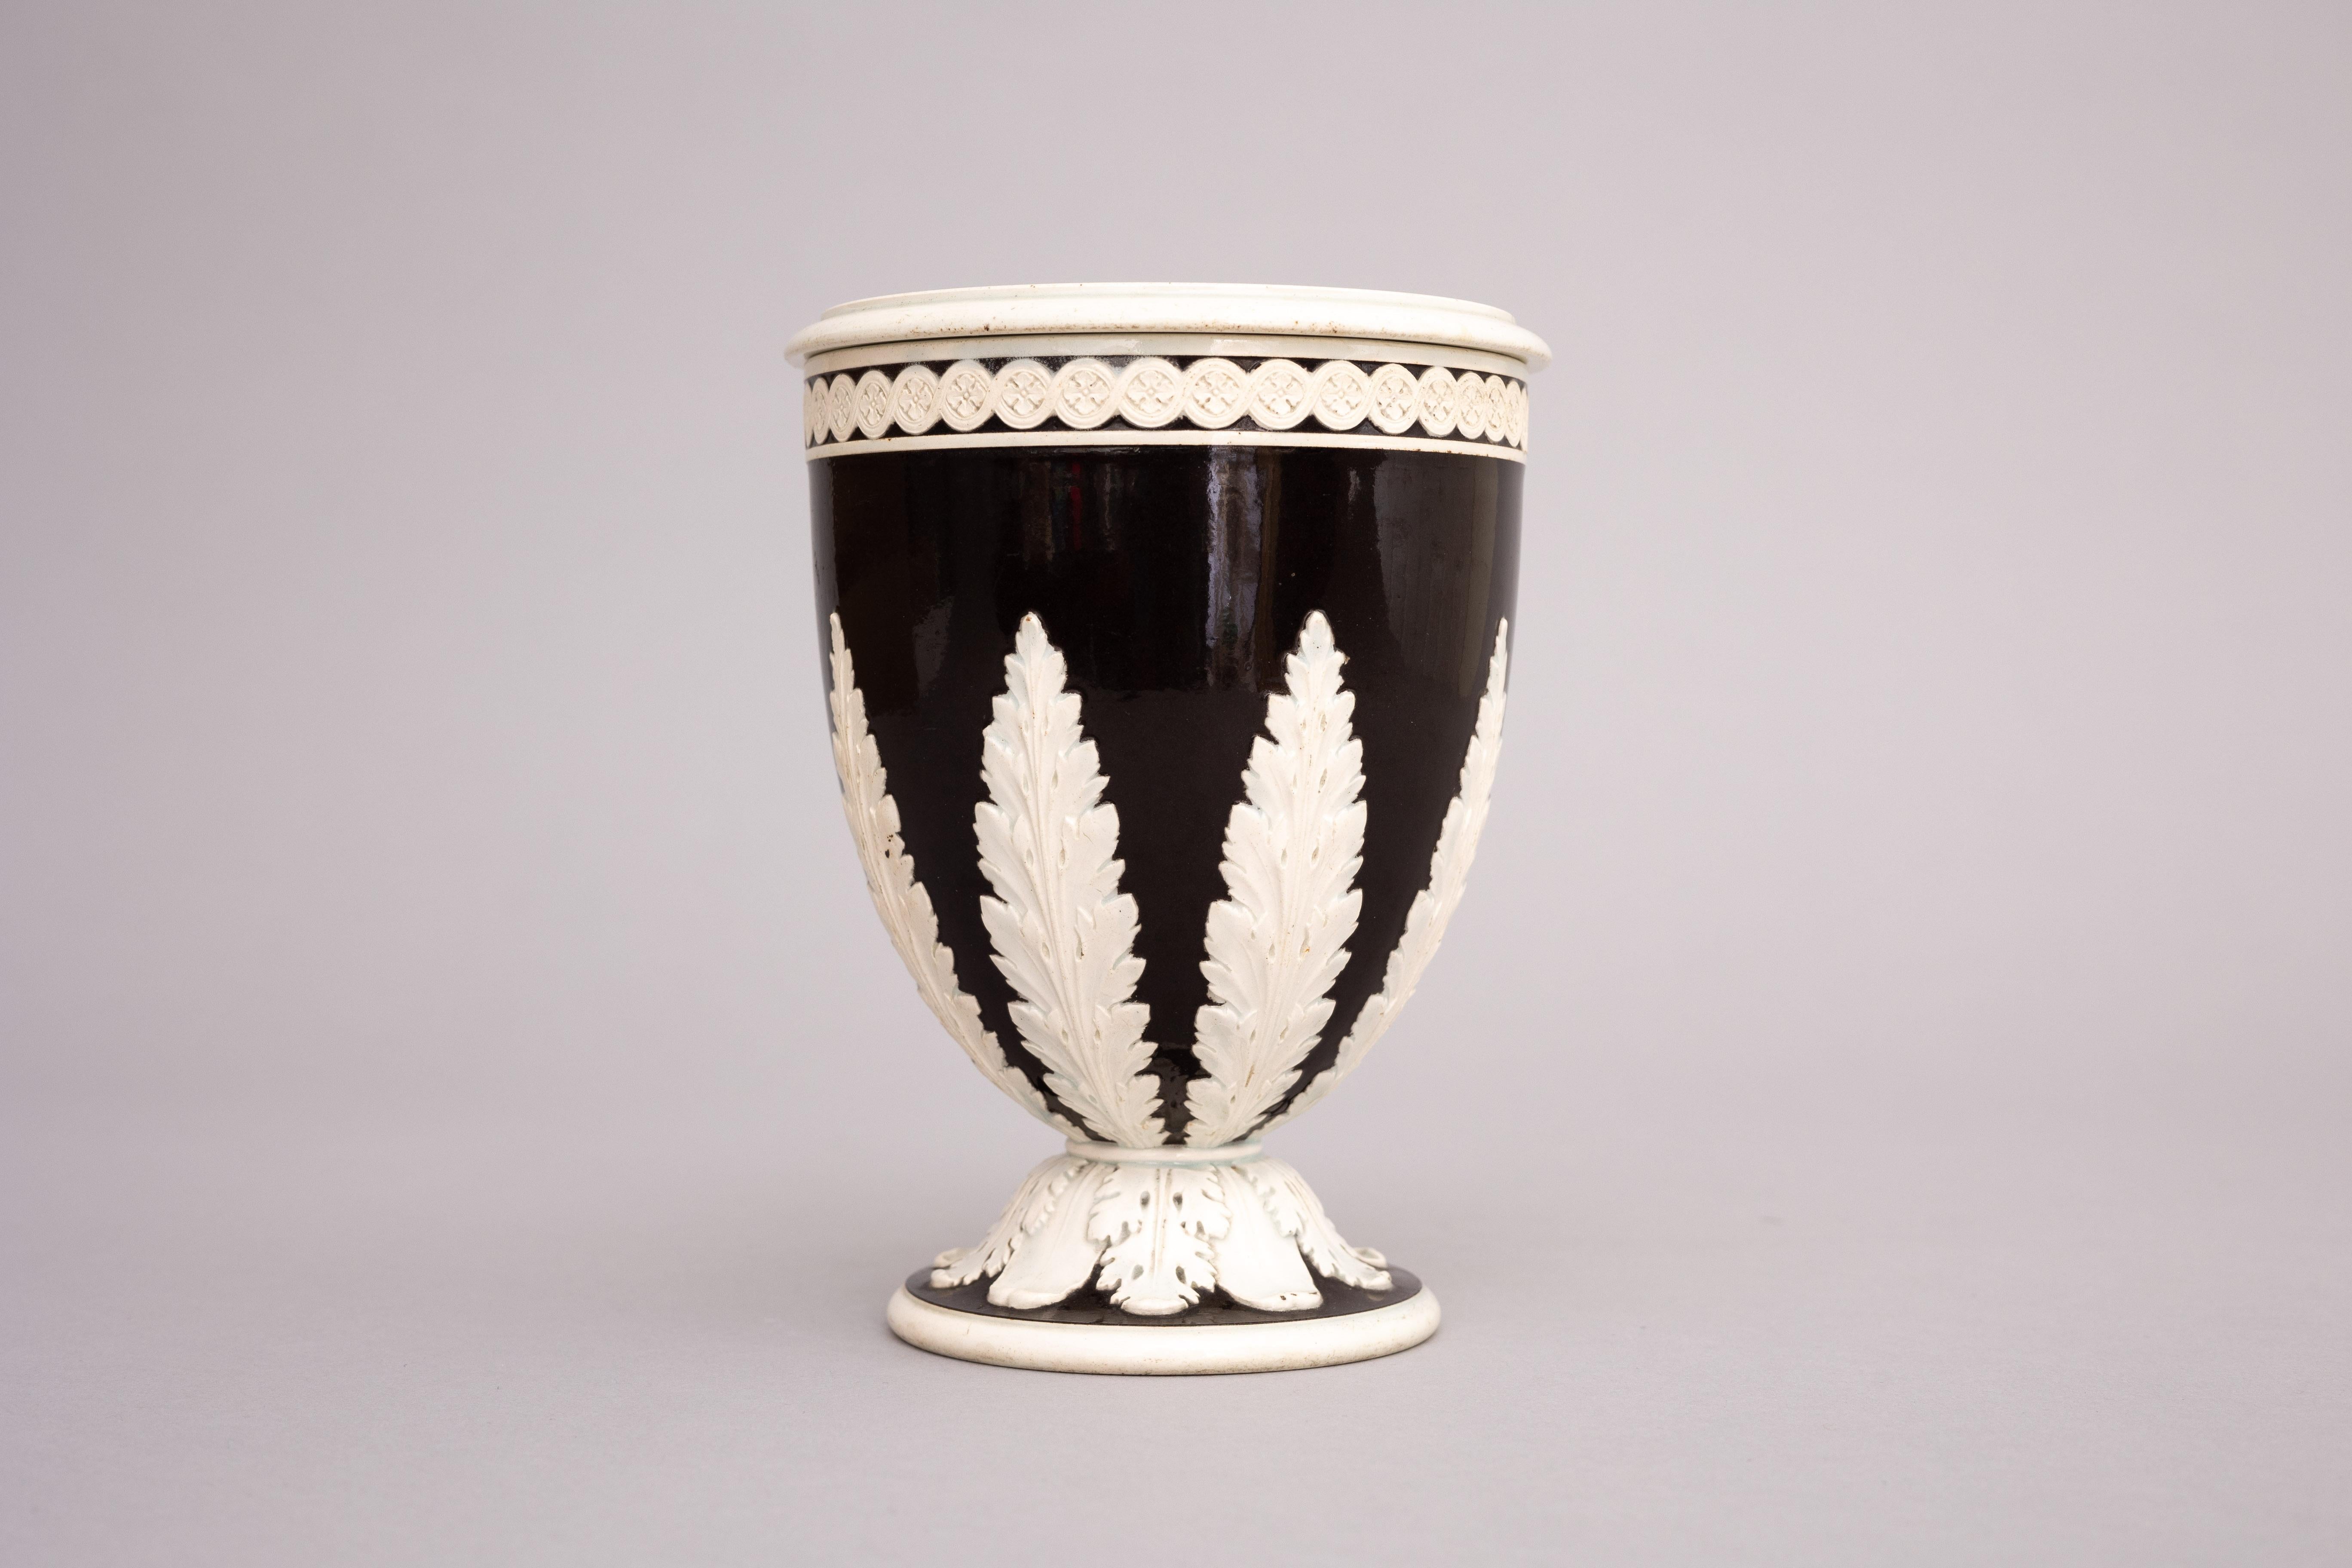 A dark brown pearlware bough pot with pierced cover and acanthus leaf decoration, made by Wedgwood circa 1785.

Josiah Wedgwood developed his pearlware glaze in 1779 as a white-ware alternative to his wildly popular creamware, or ‘Queen’s ware.’